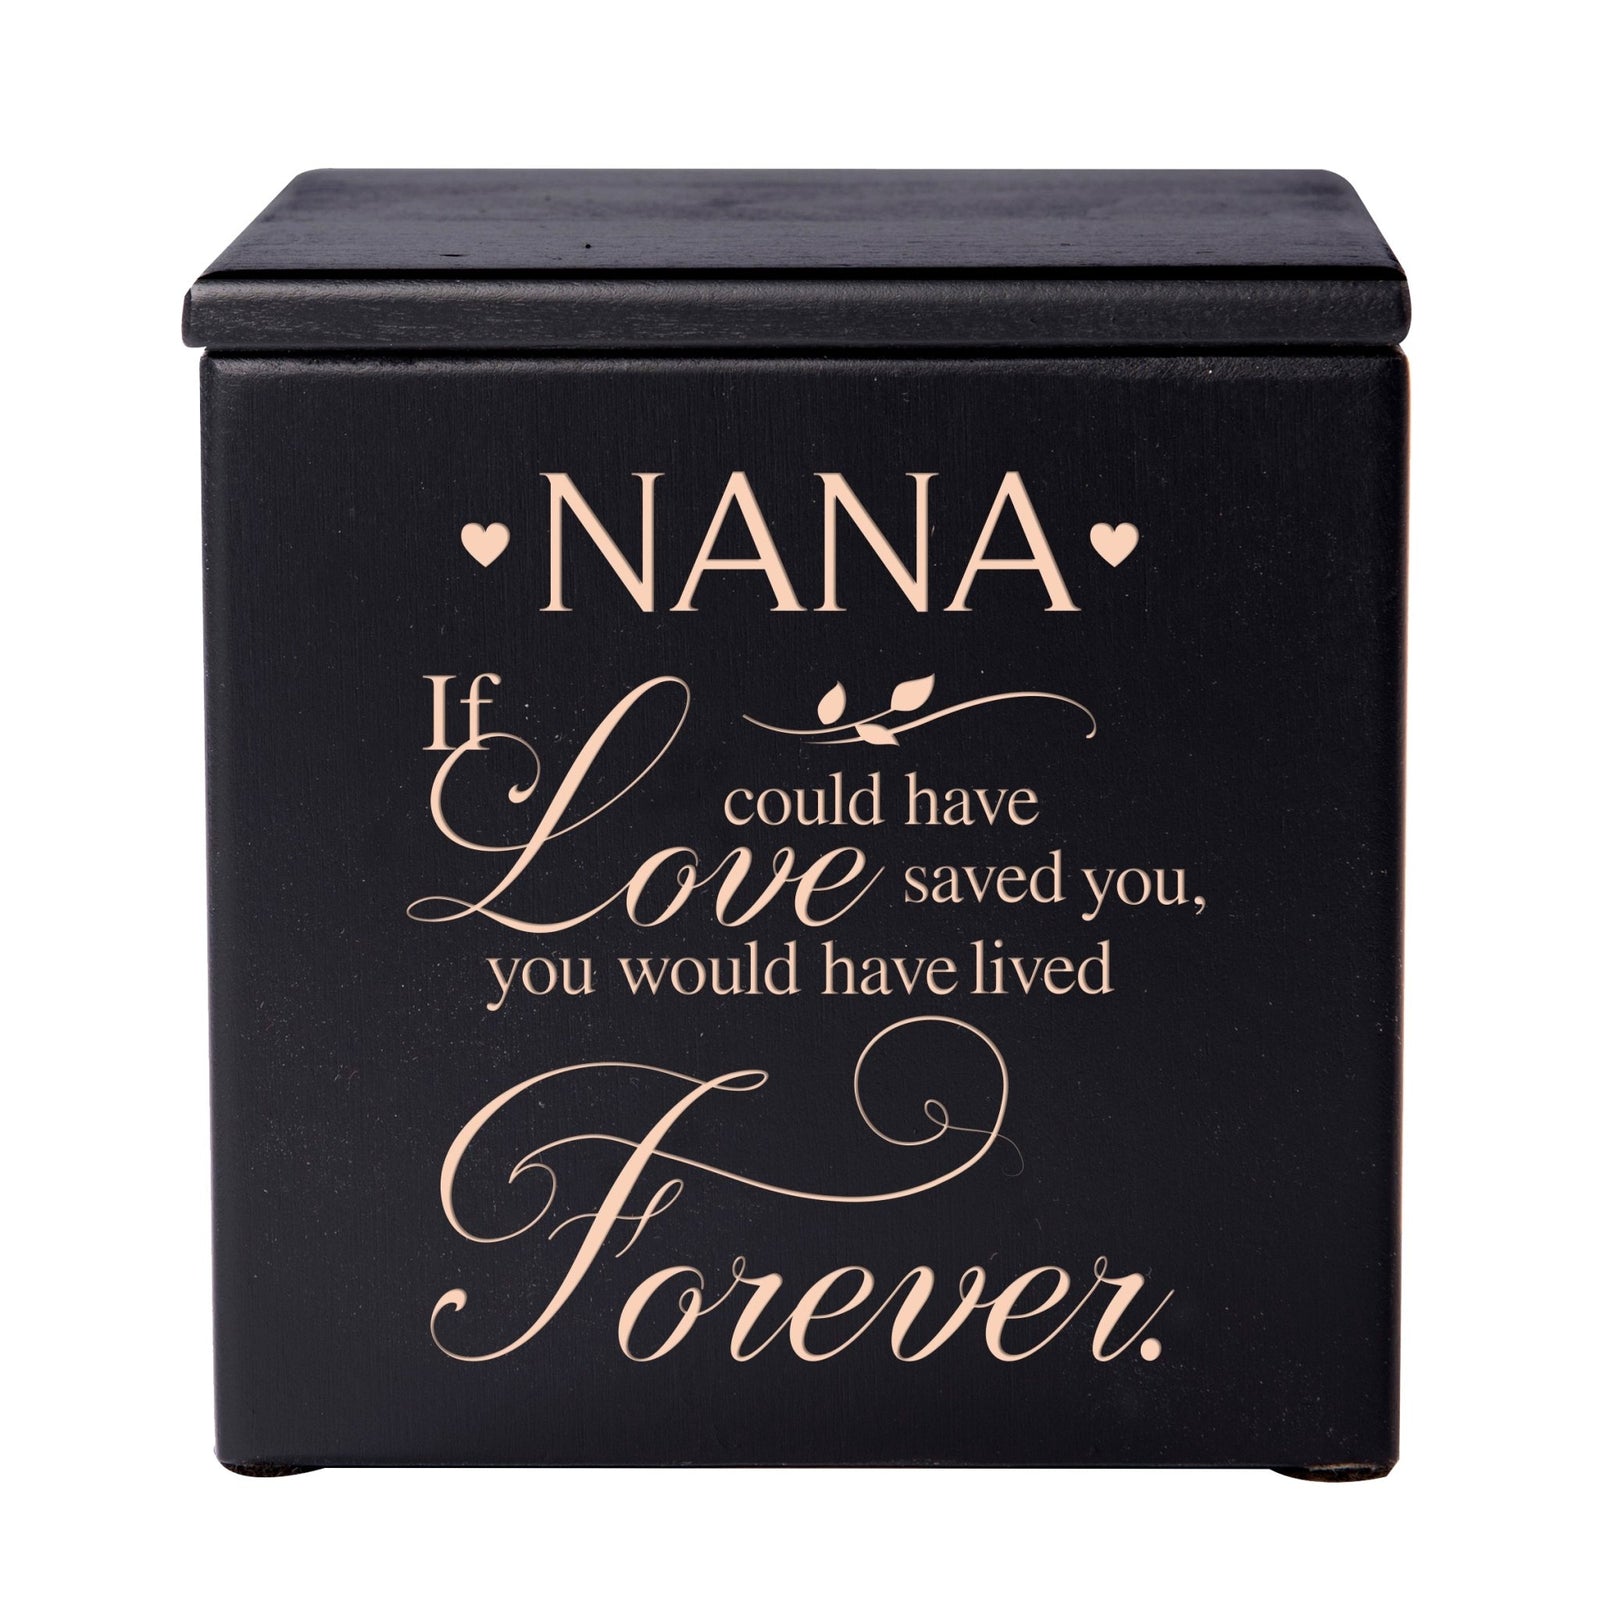 Modern Inspirational Memorial Wooden Cremation Urn Box 4.5x4.5in Holds 49 Cu Inches Of Human Ashes (If love could have saved Nana) Funeral and Commemorative Keepsake - LifeSong Milestones